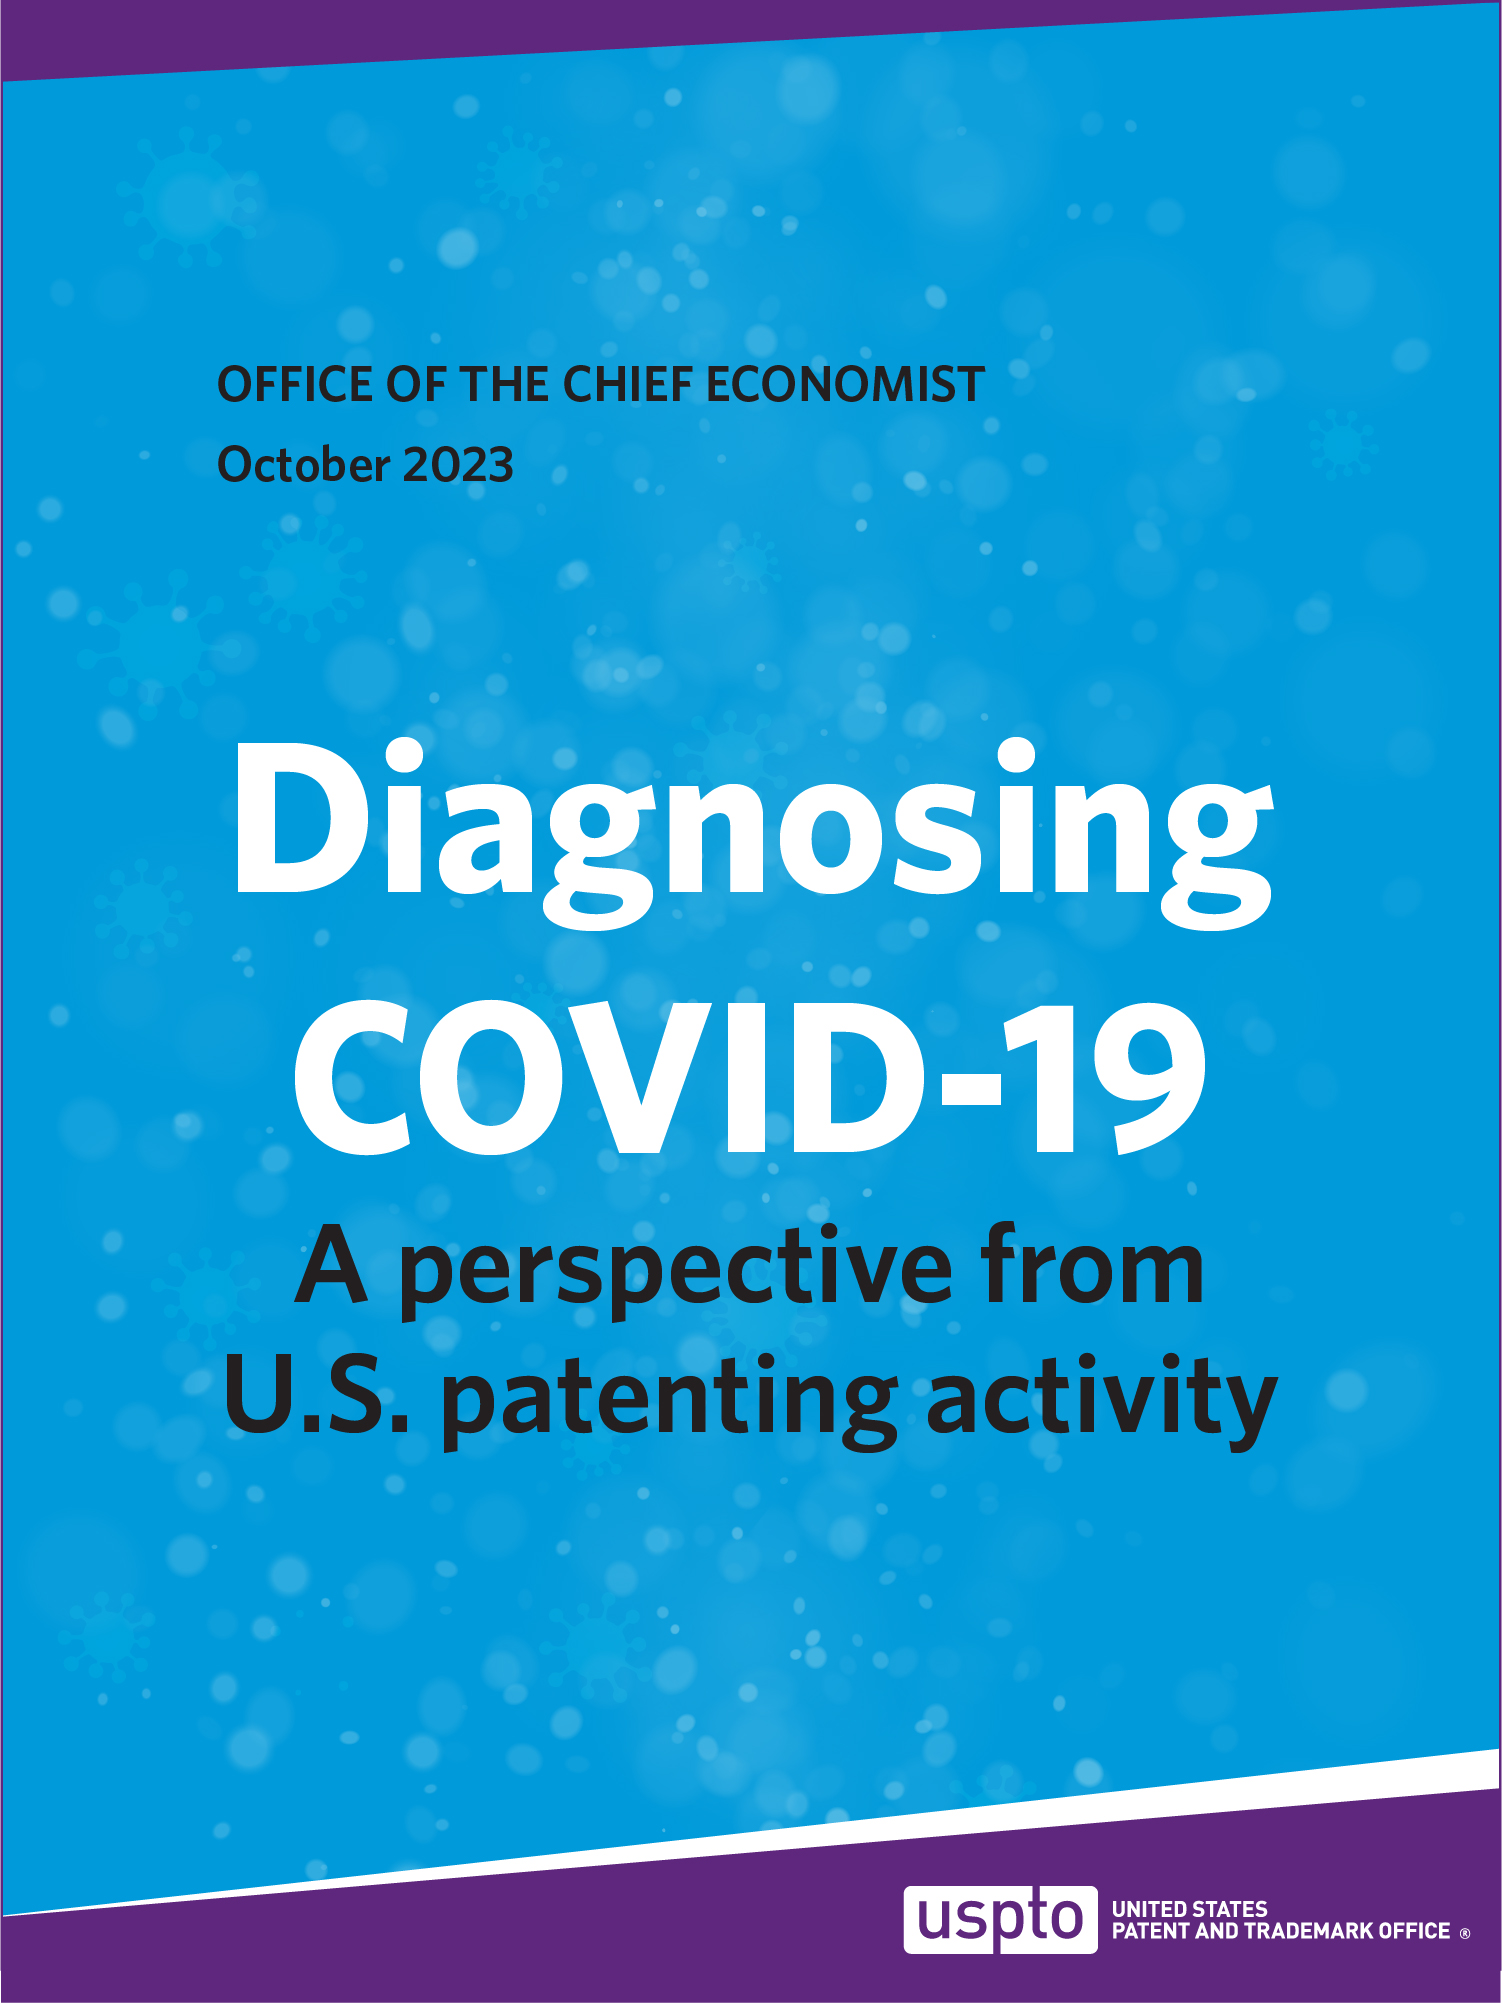 Diagnosing COVID-19 report on a blue background.